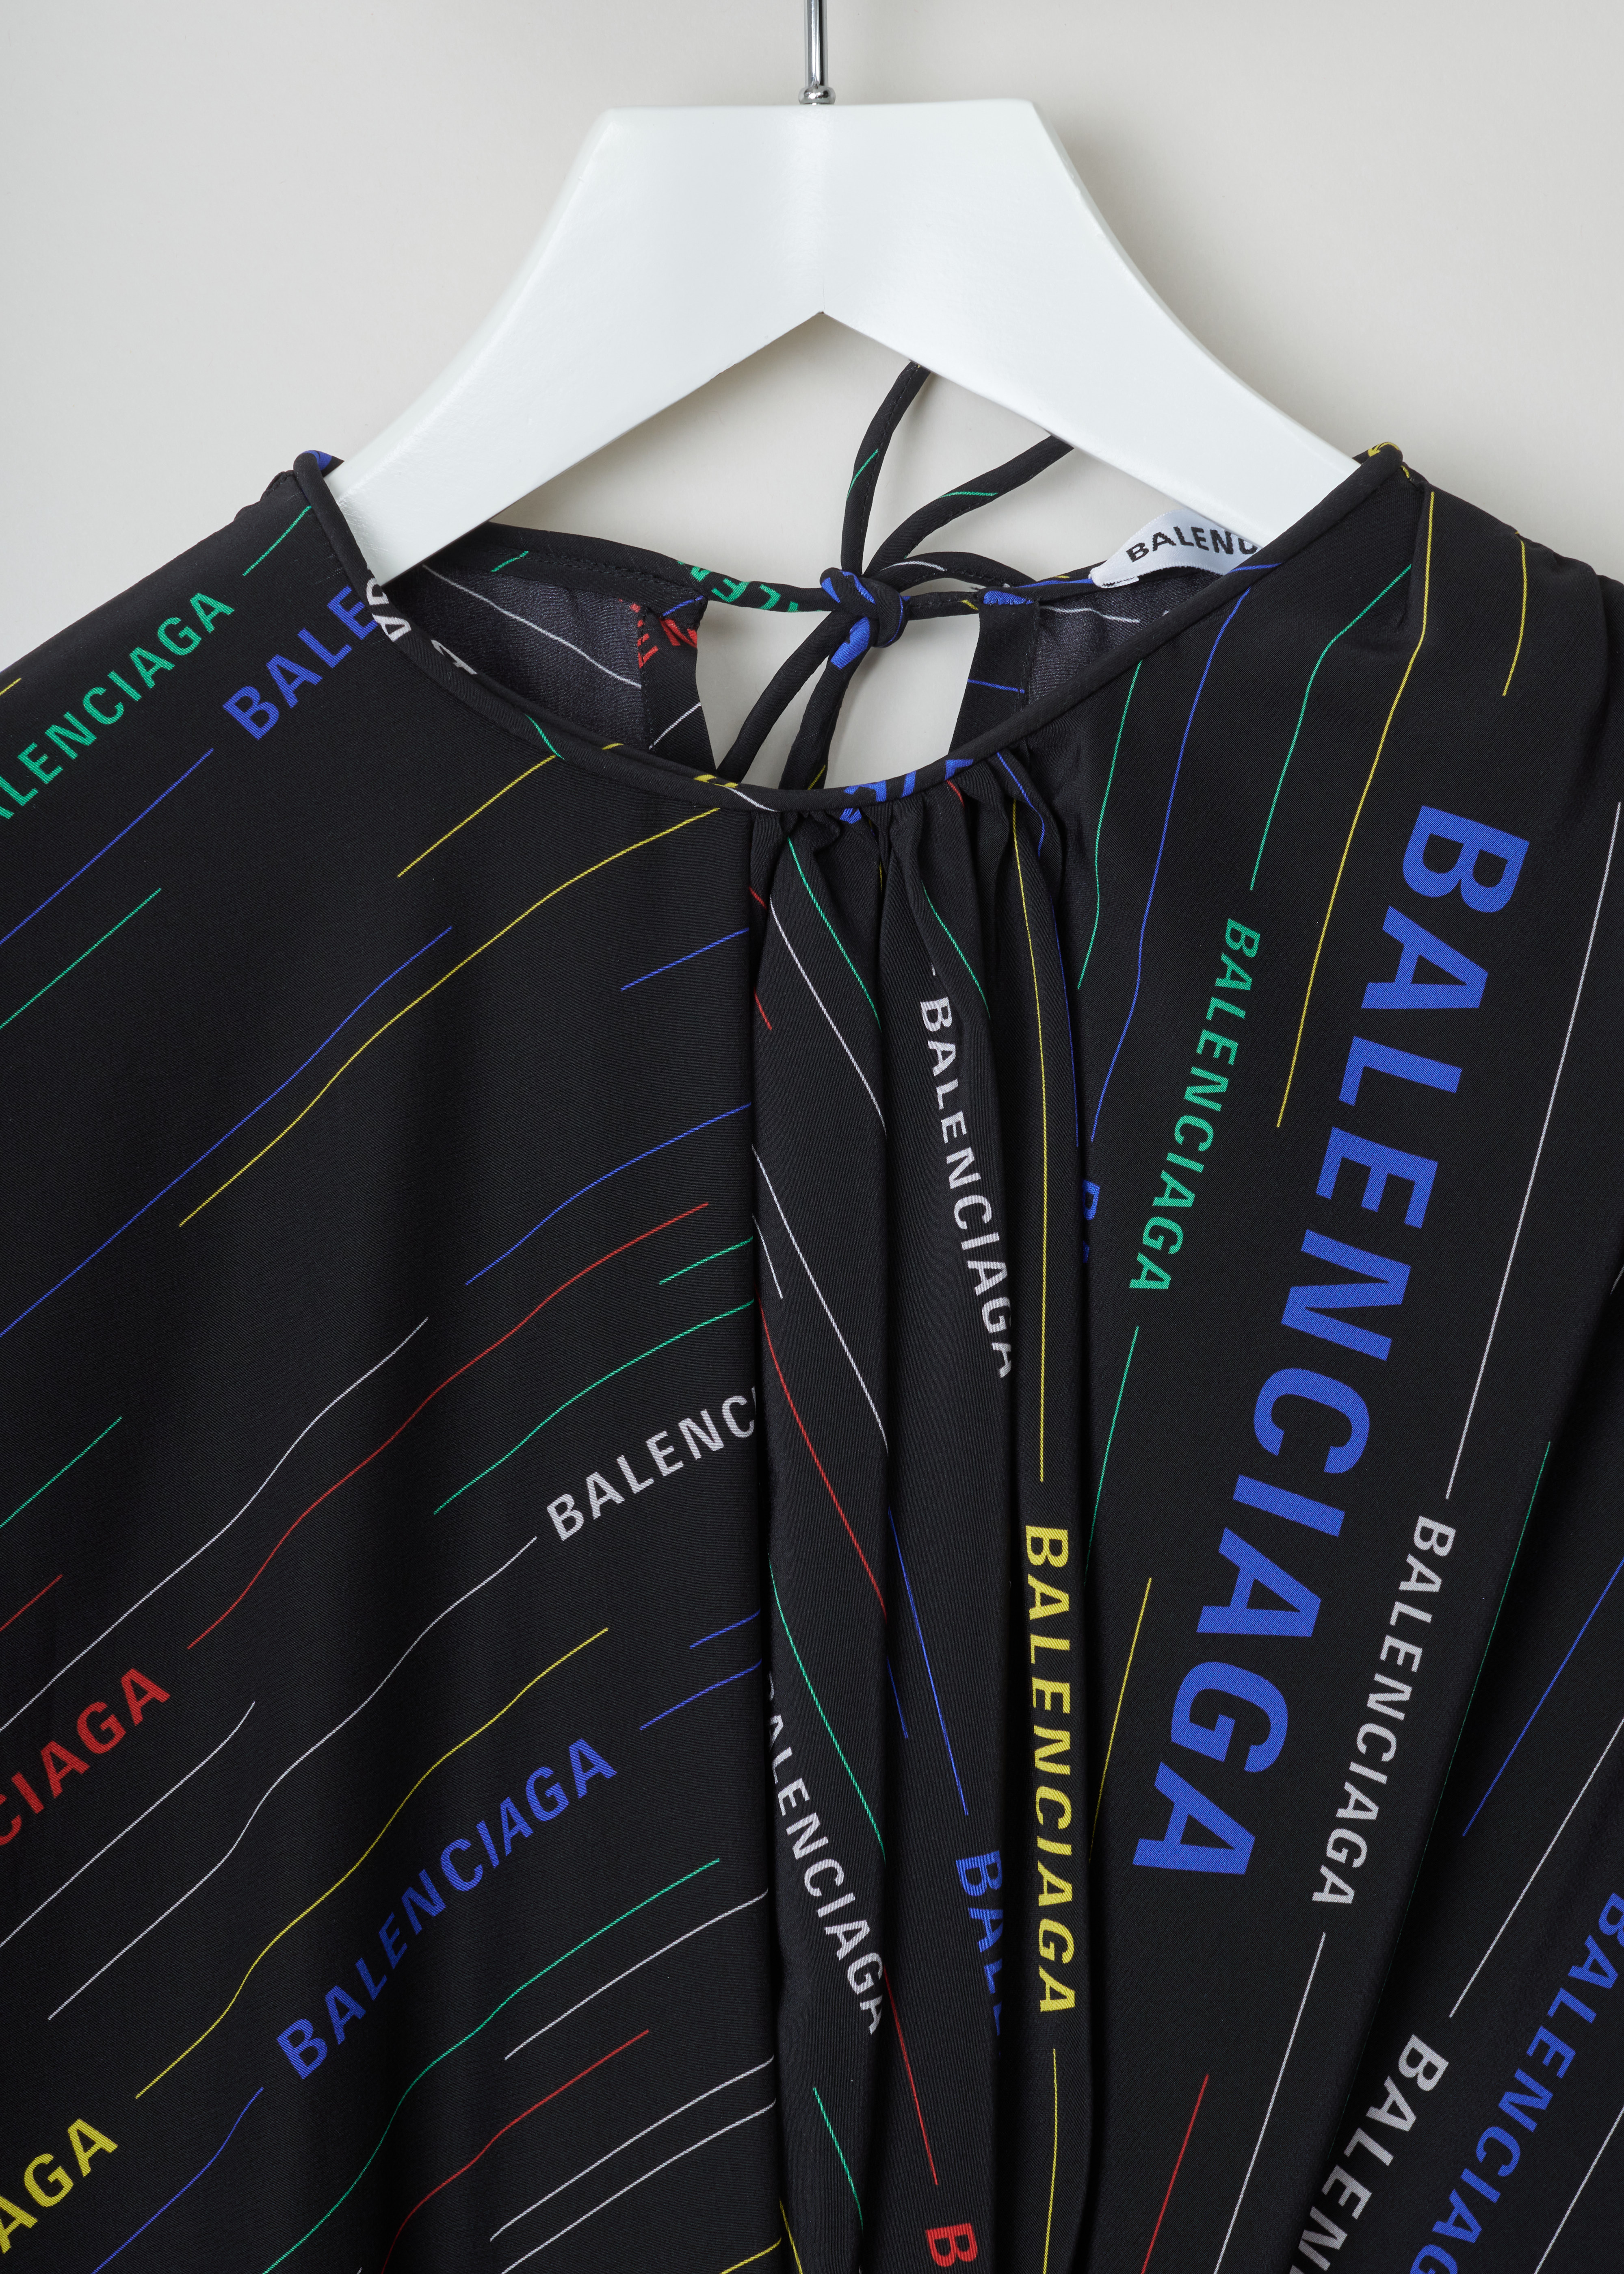 Balenciaga Logo printed dress 556343_TDL55_2771 black multicolour detail. Black silk dress with multicolour diagonal logo print, gathered rounded neckline, buttoned cuffs and a self-tie bow fastening on the back.